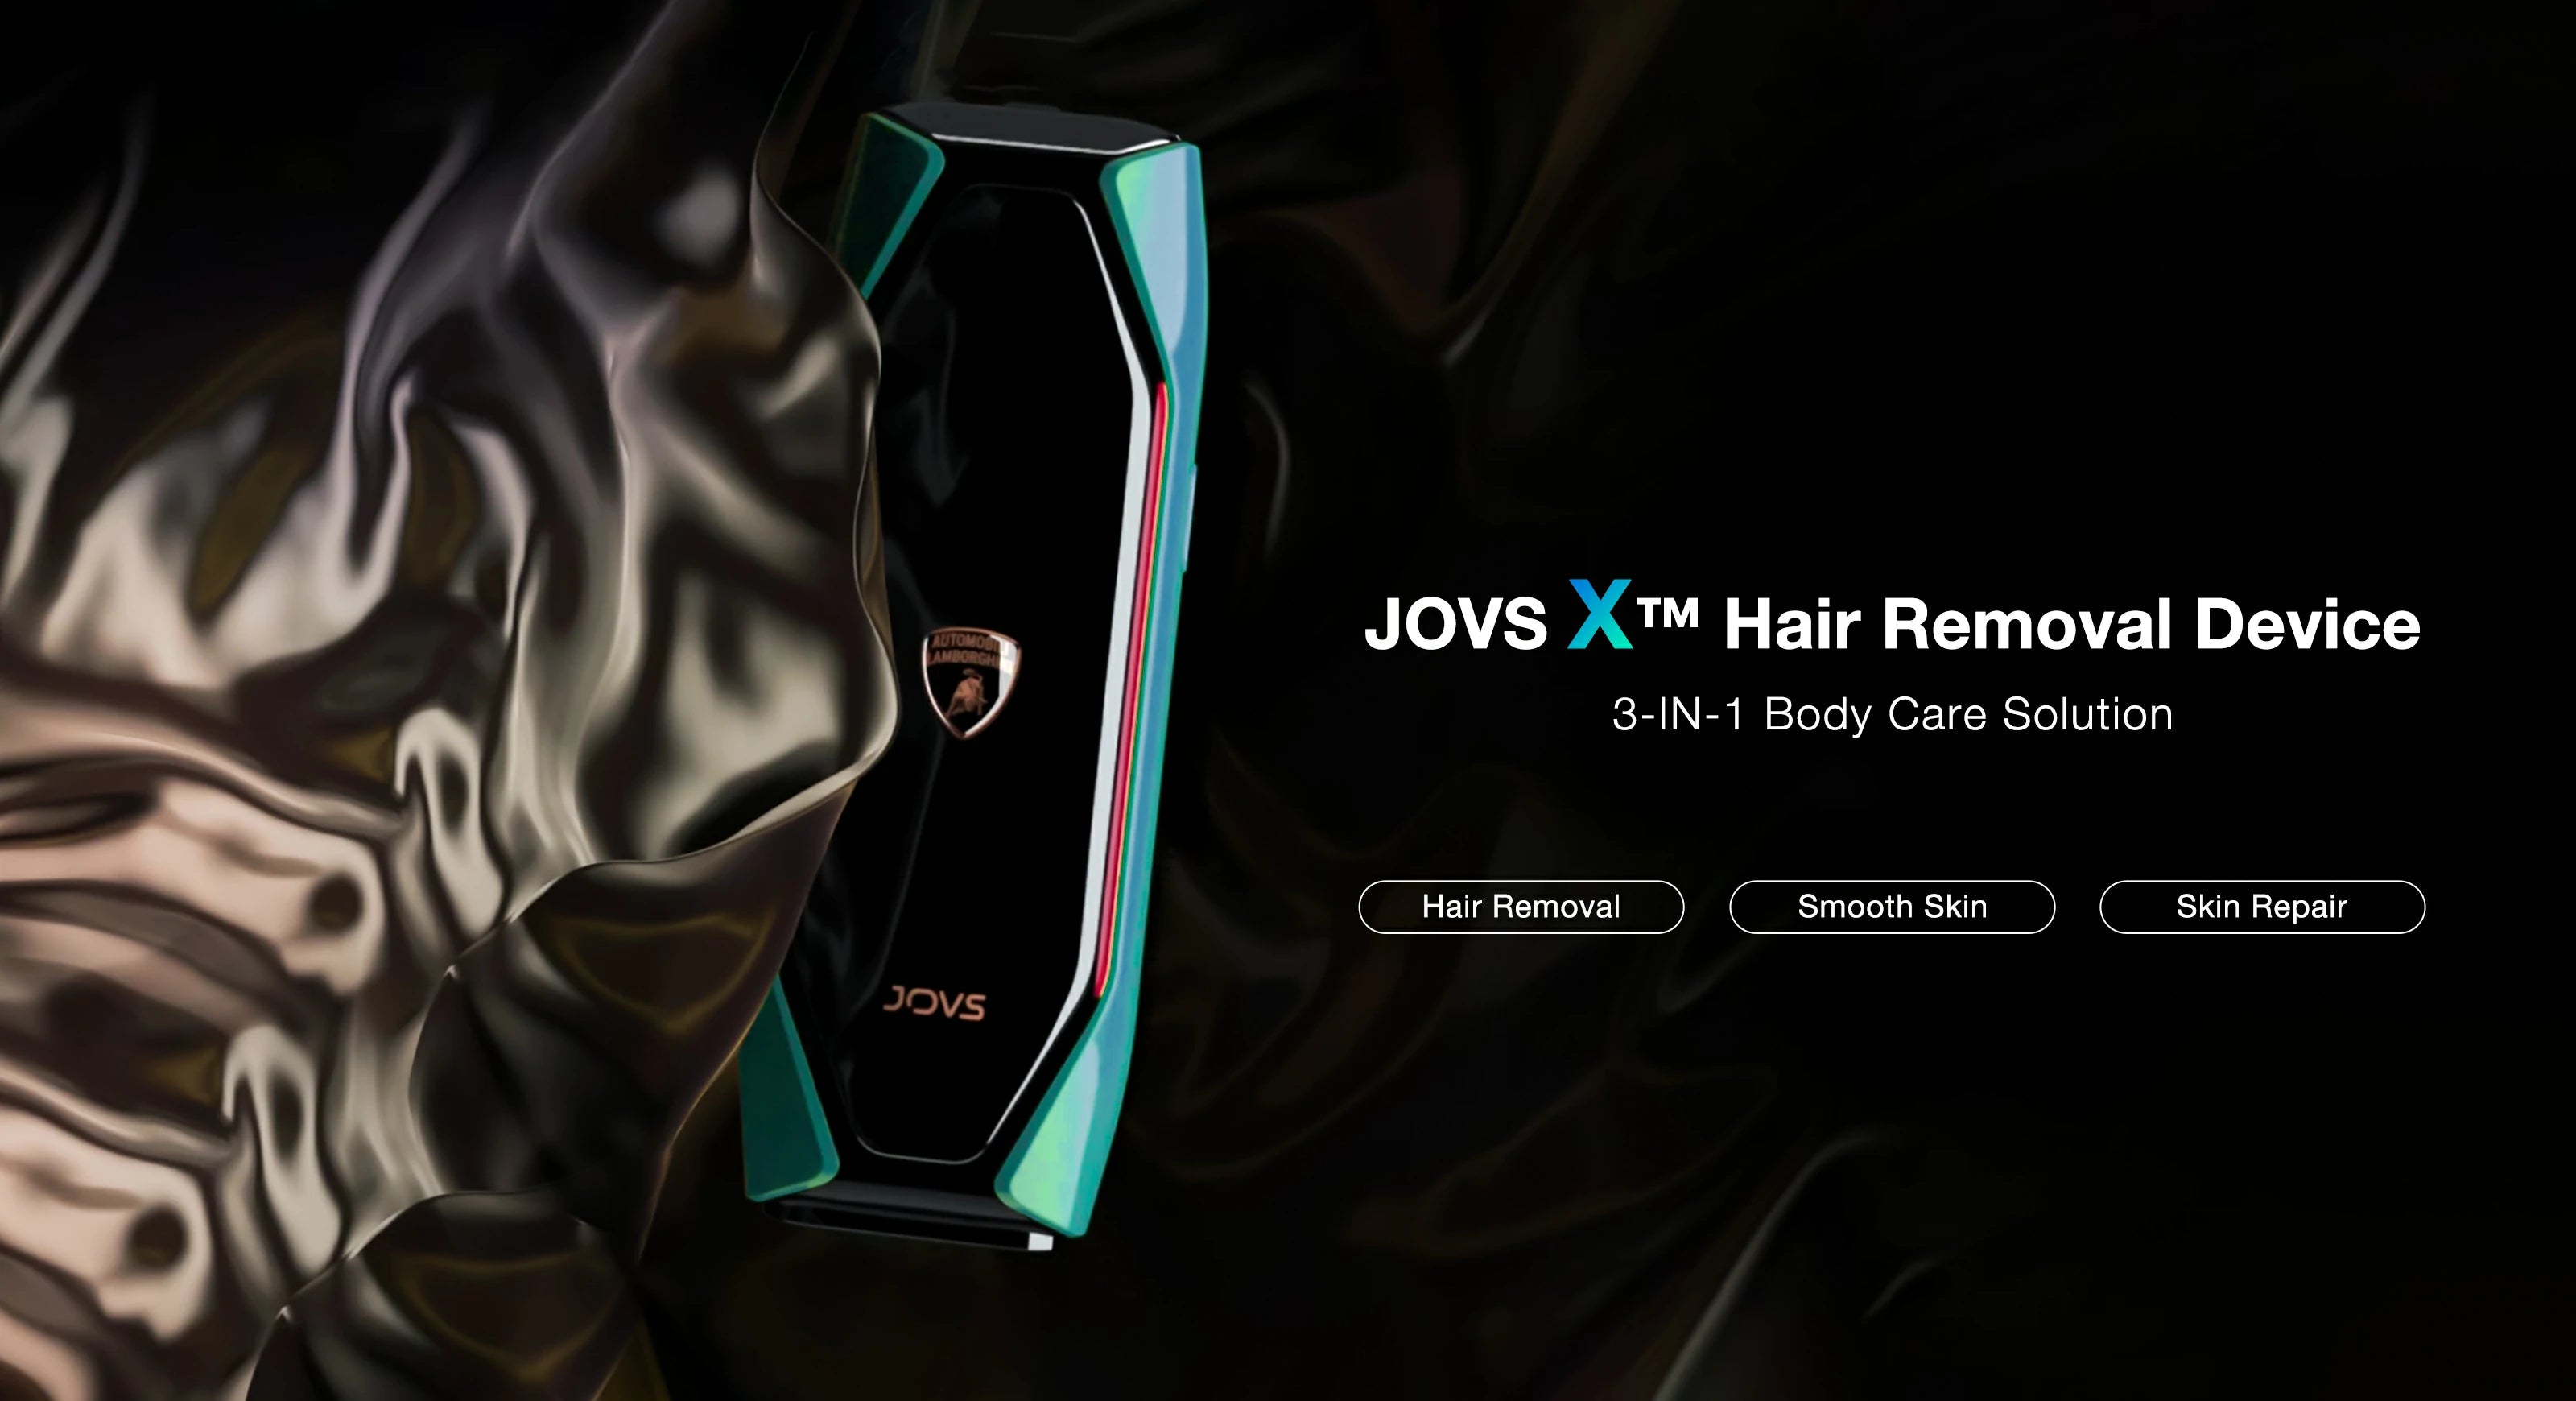 JOVS X™ Emerald 3-IN-1 IPL Hair Removal Device, combining hair removal, skin smoothing, and skin repair features, elegantly presented on a smooth silk background.